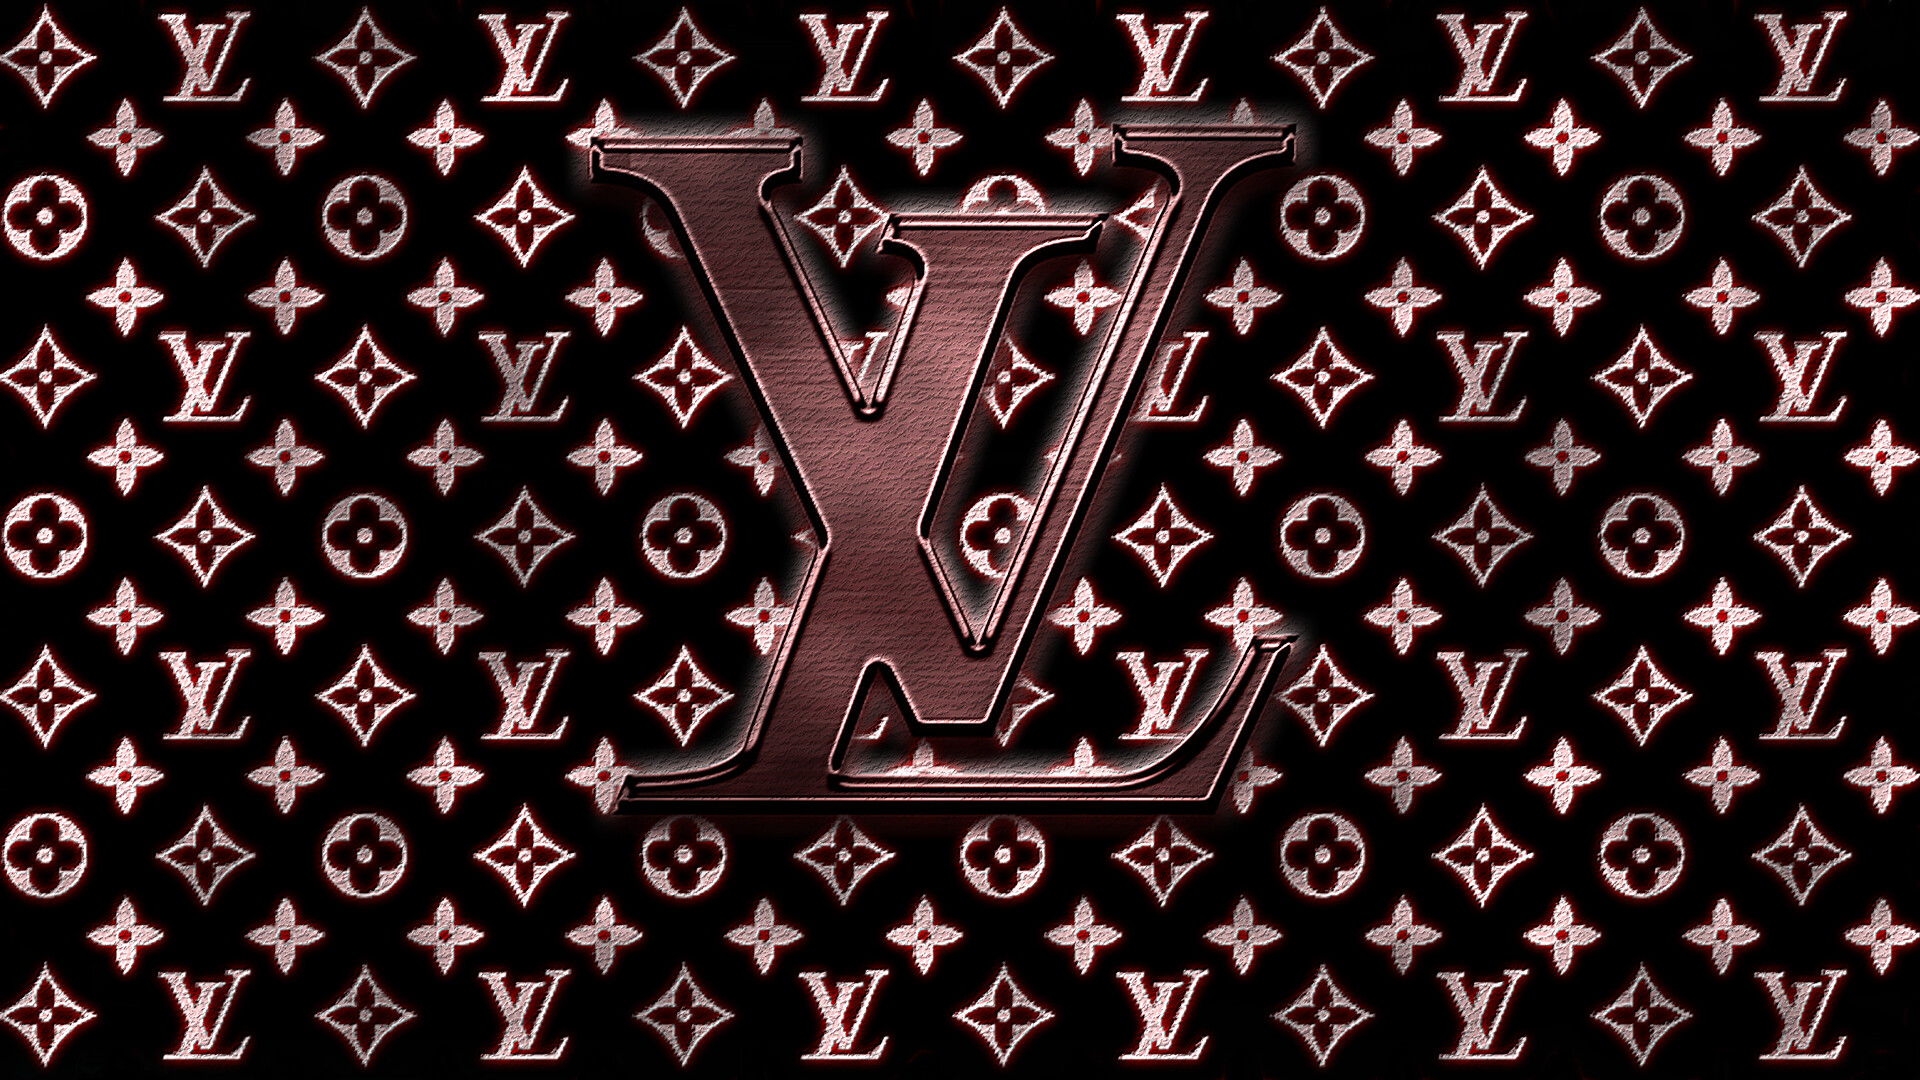 Louis Vuitton: The brand is synonymous with luxury and style. 1920x1080 Full HD Wallpaper.